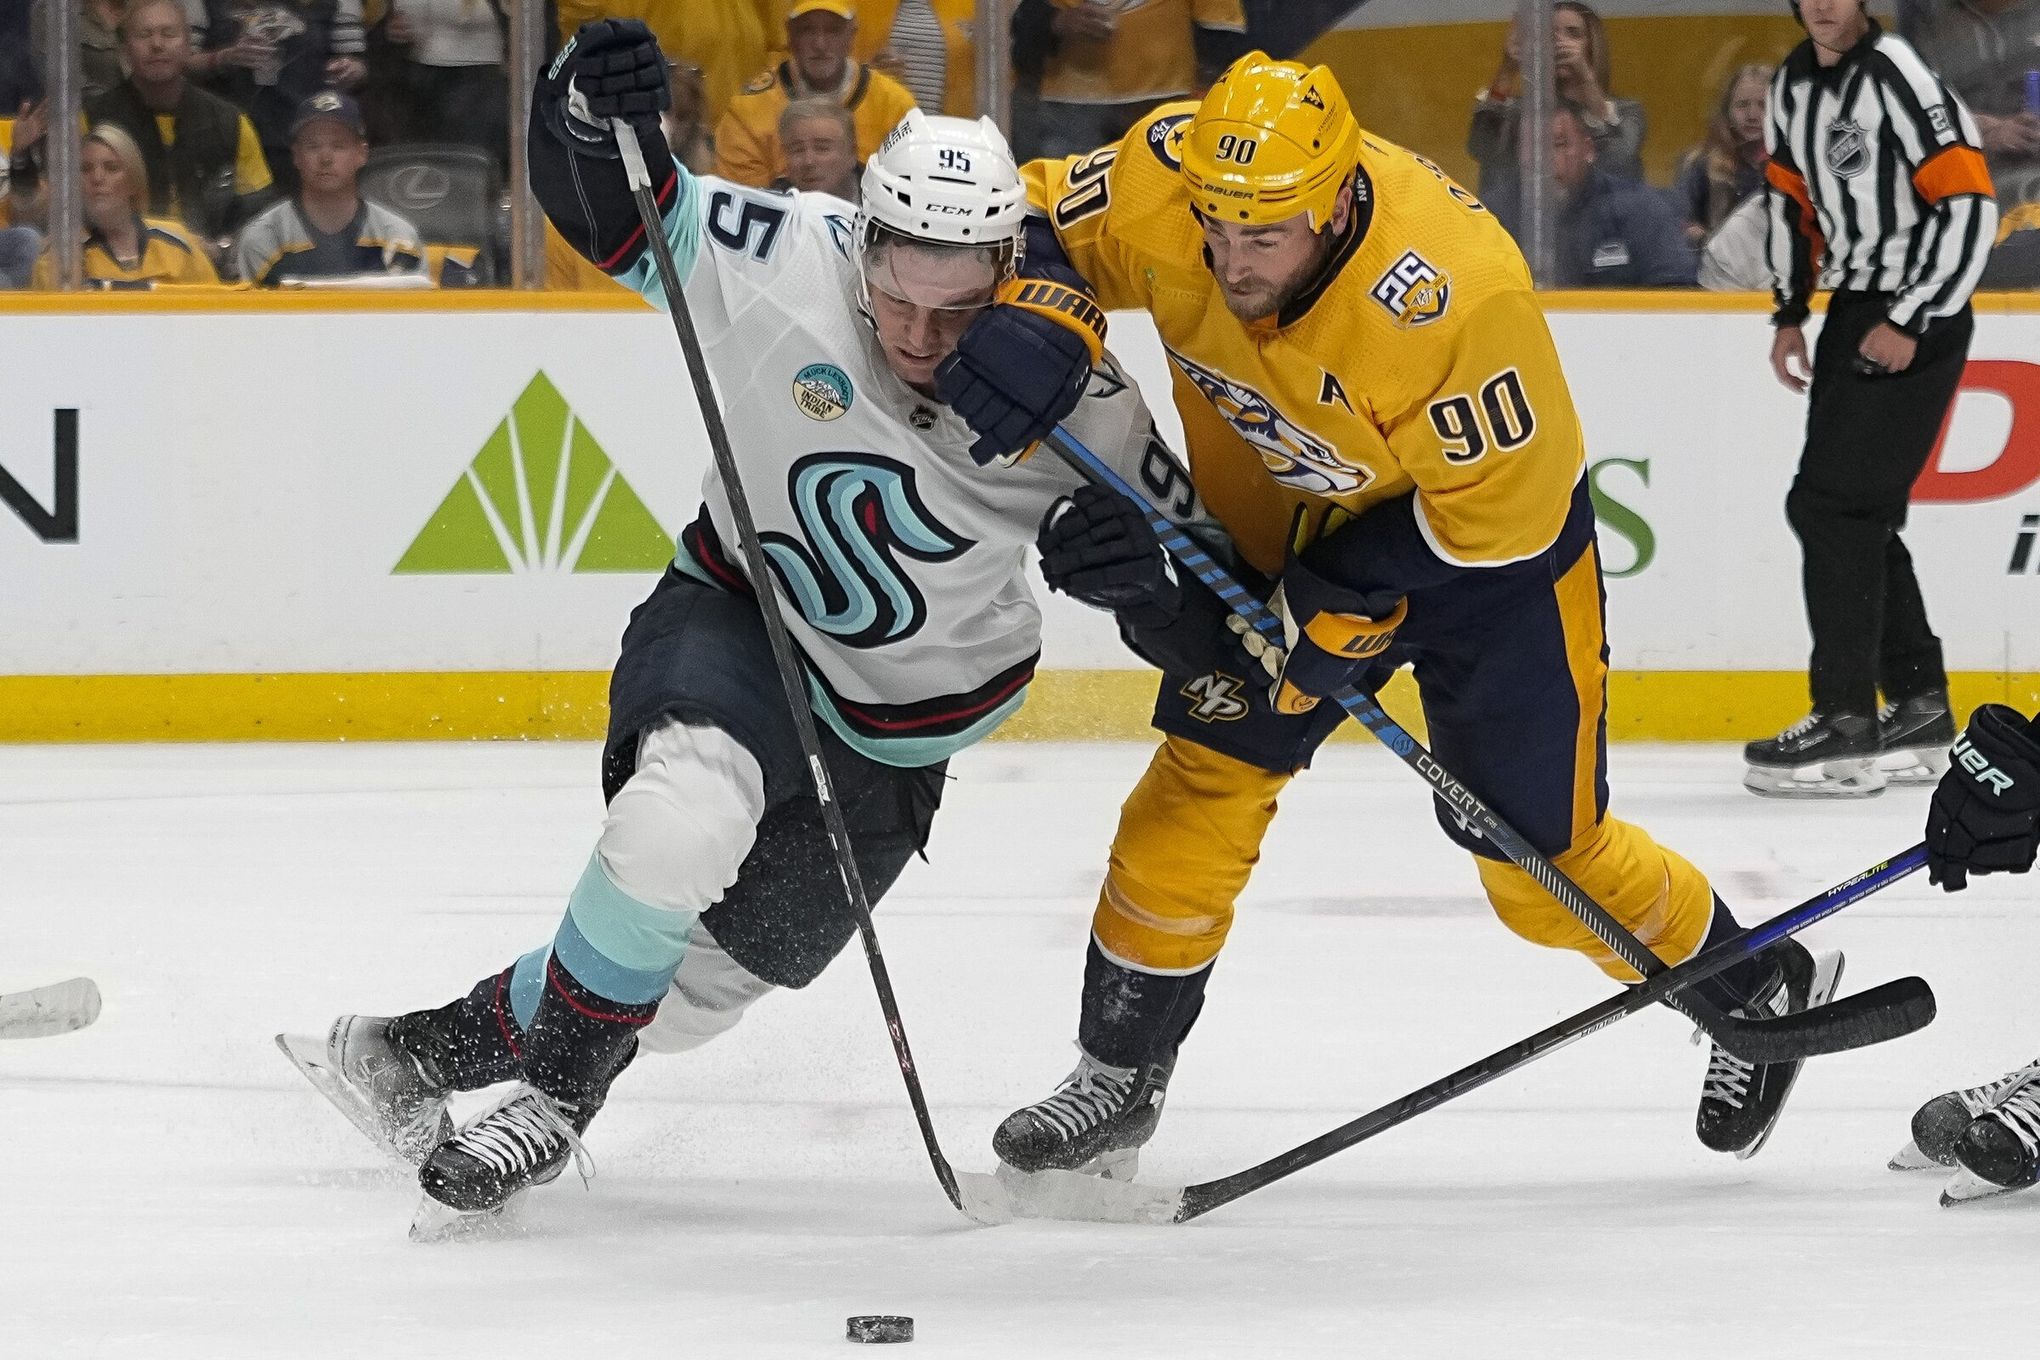 Nashville Predators: Ranking the Top Jerseys in Franchise History - Page 2